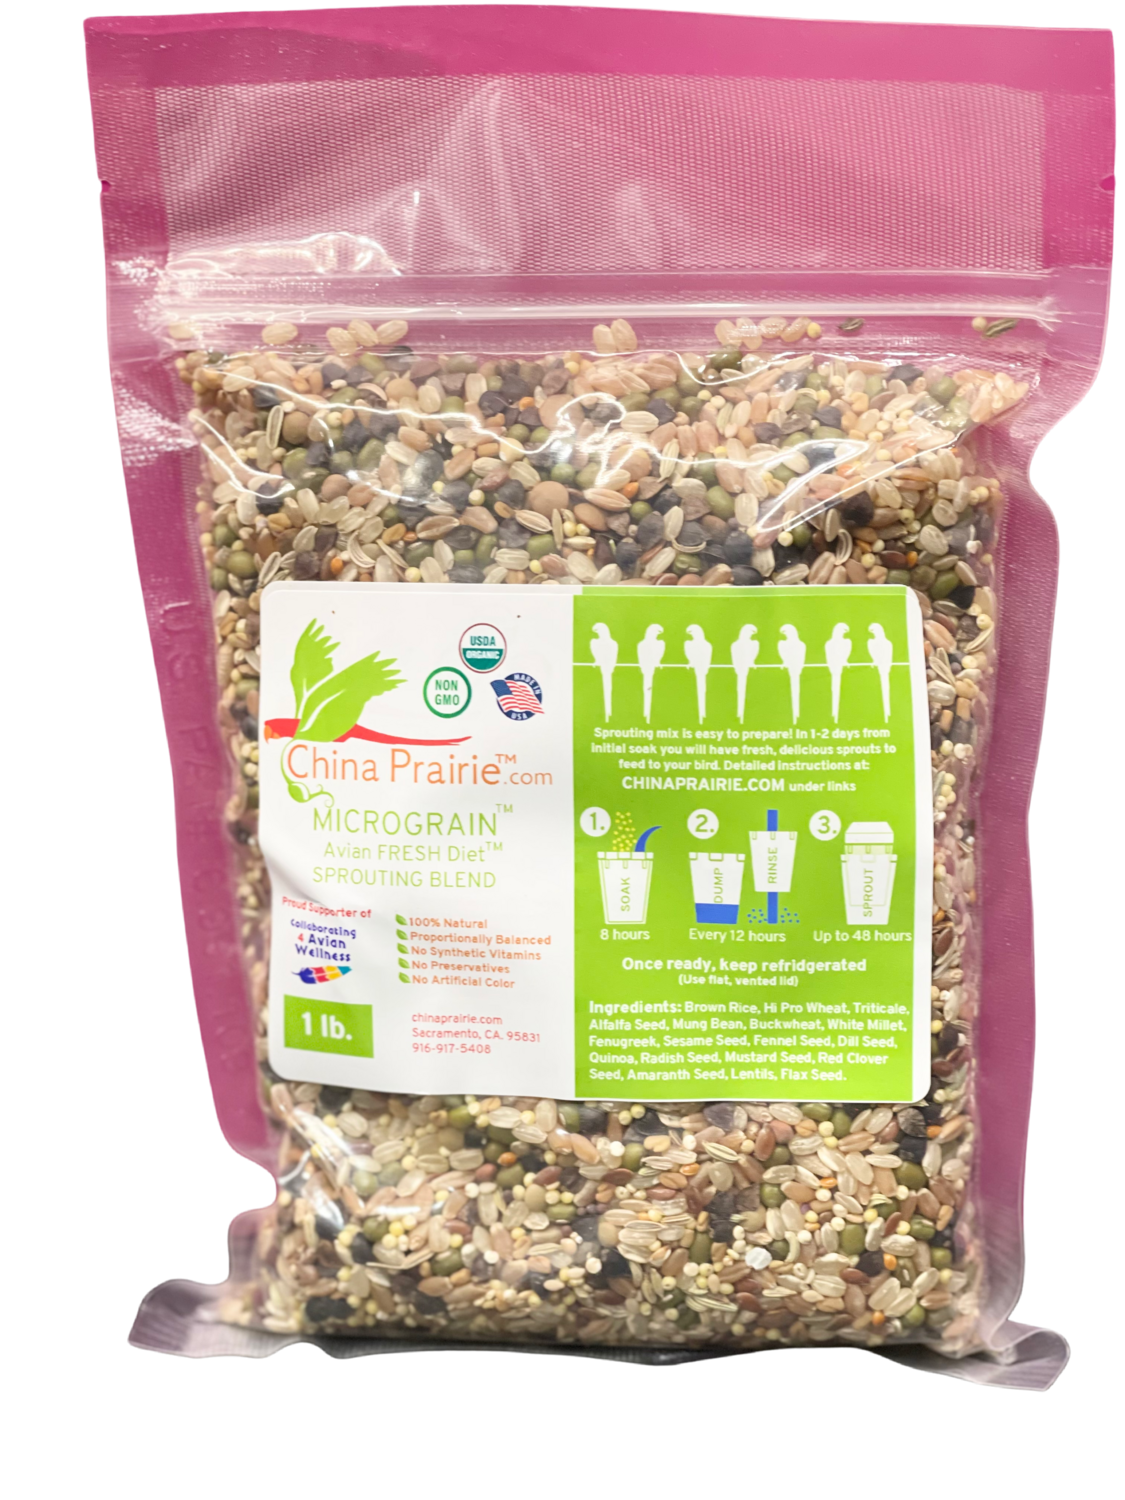 1 Lb Micrograin Sprouting Blend from China Prairie